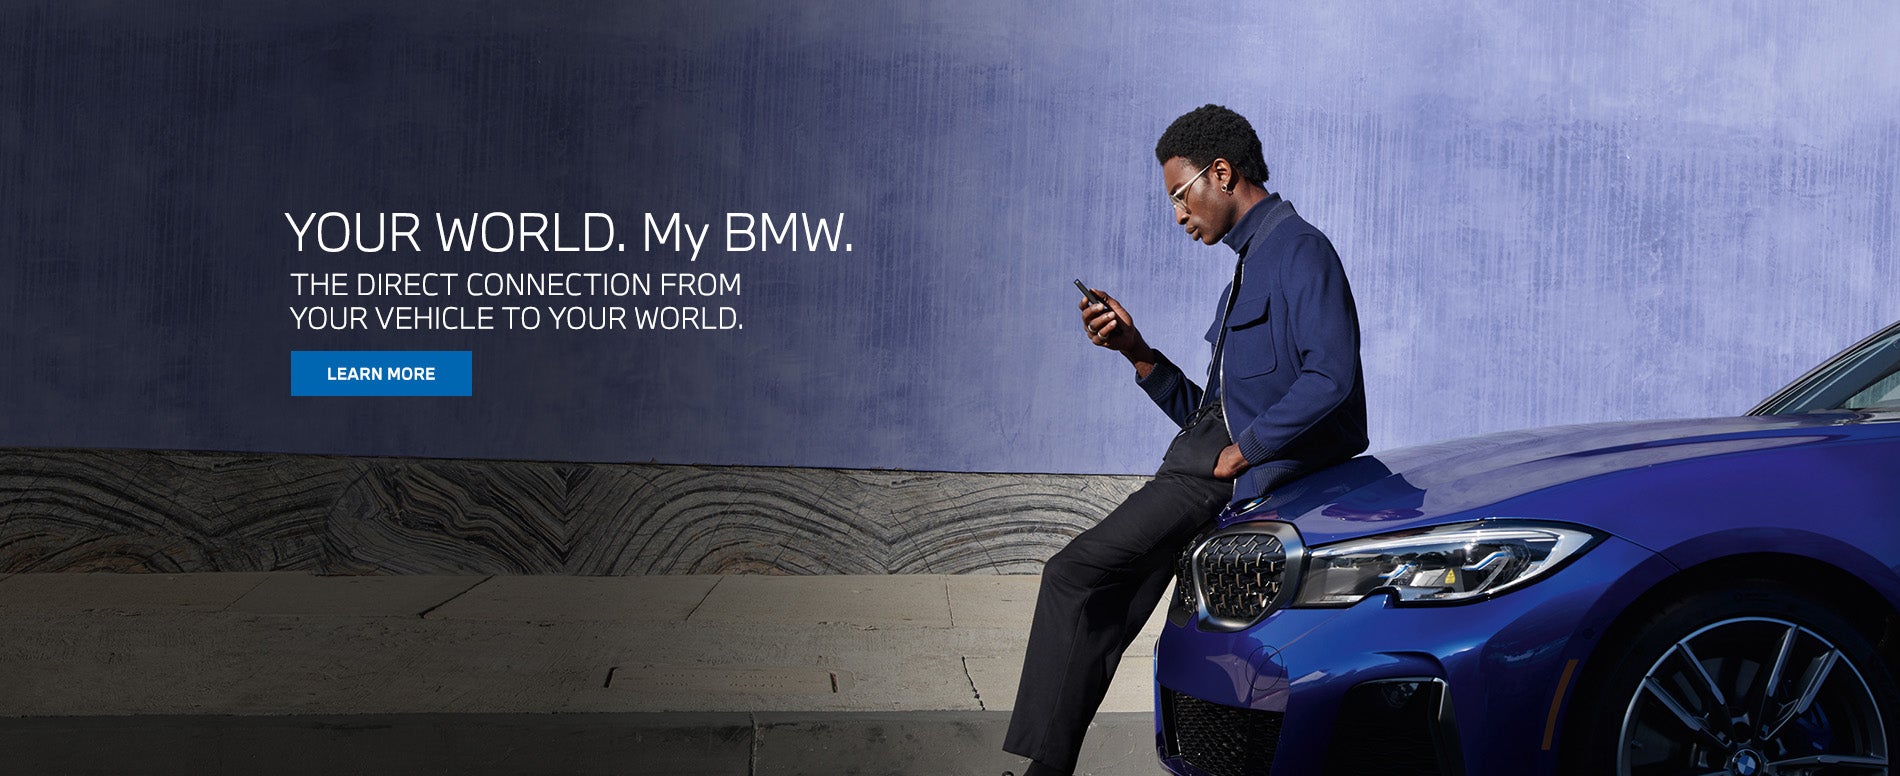 Download the My BMW App today and get connected to your BMW